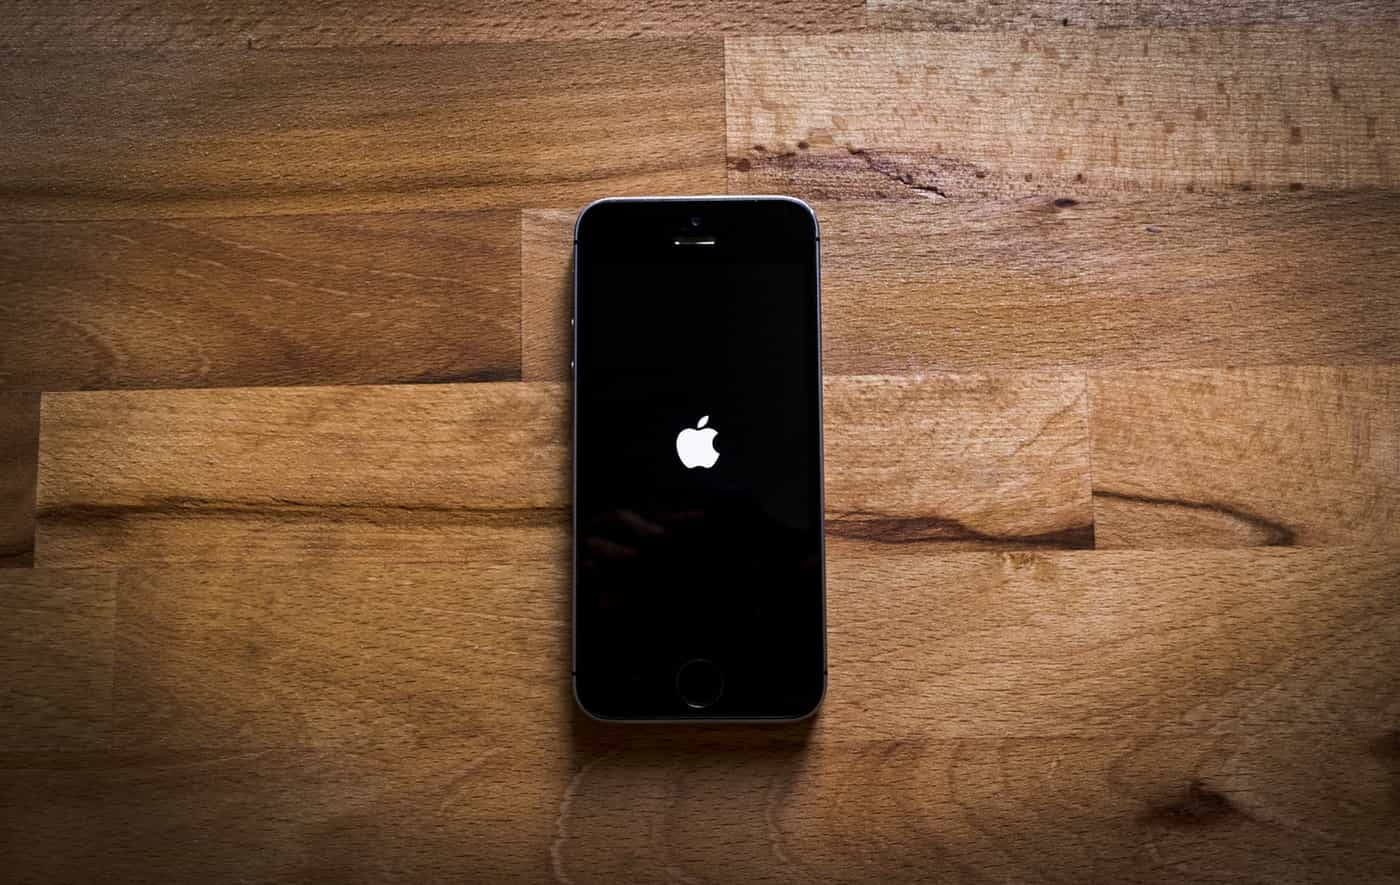 Iphone 5 with the apple logo on screen